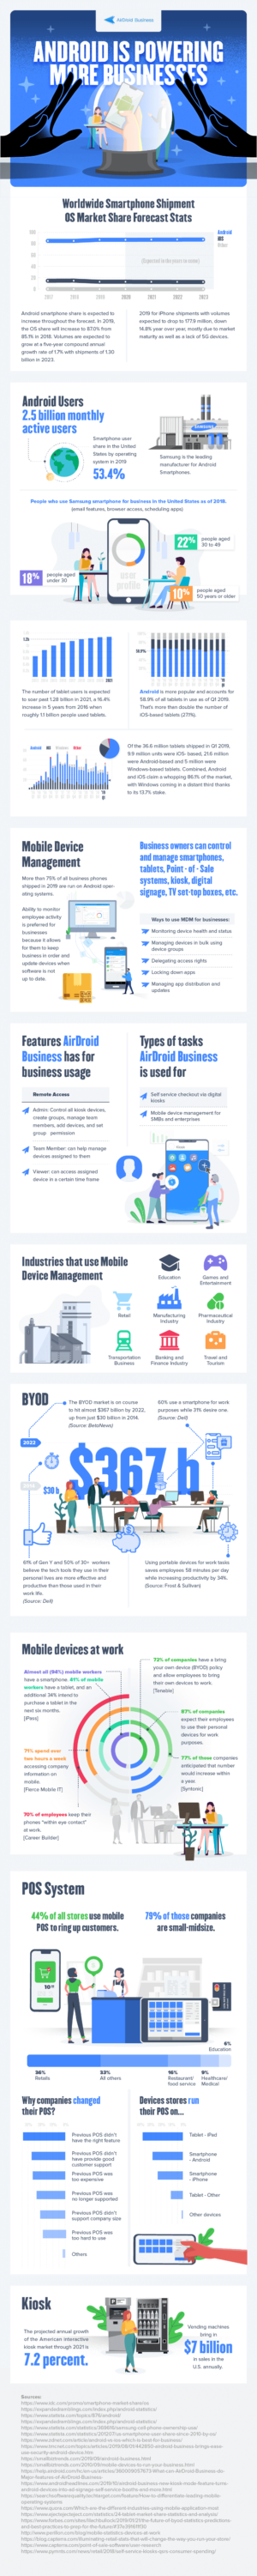 Mobile Device Management: Android is Powering More Businesses